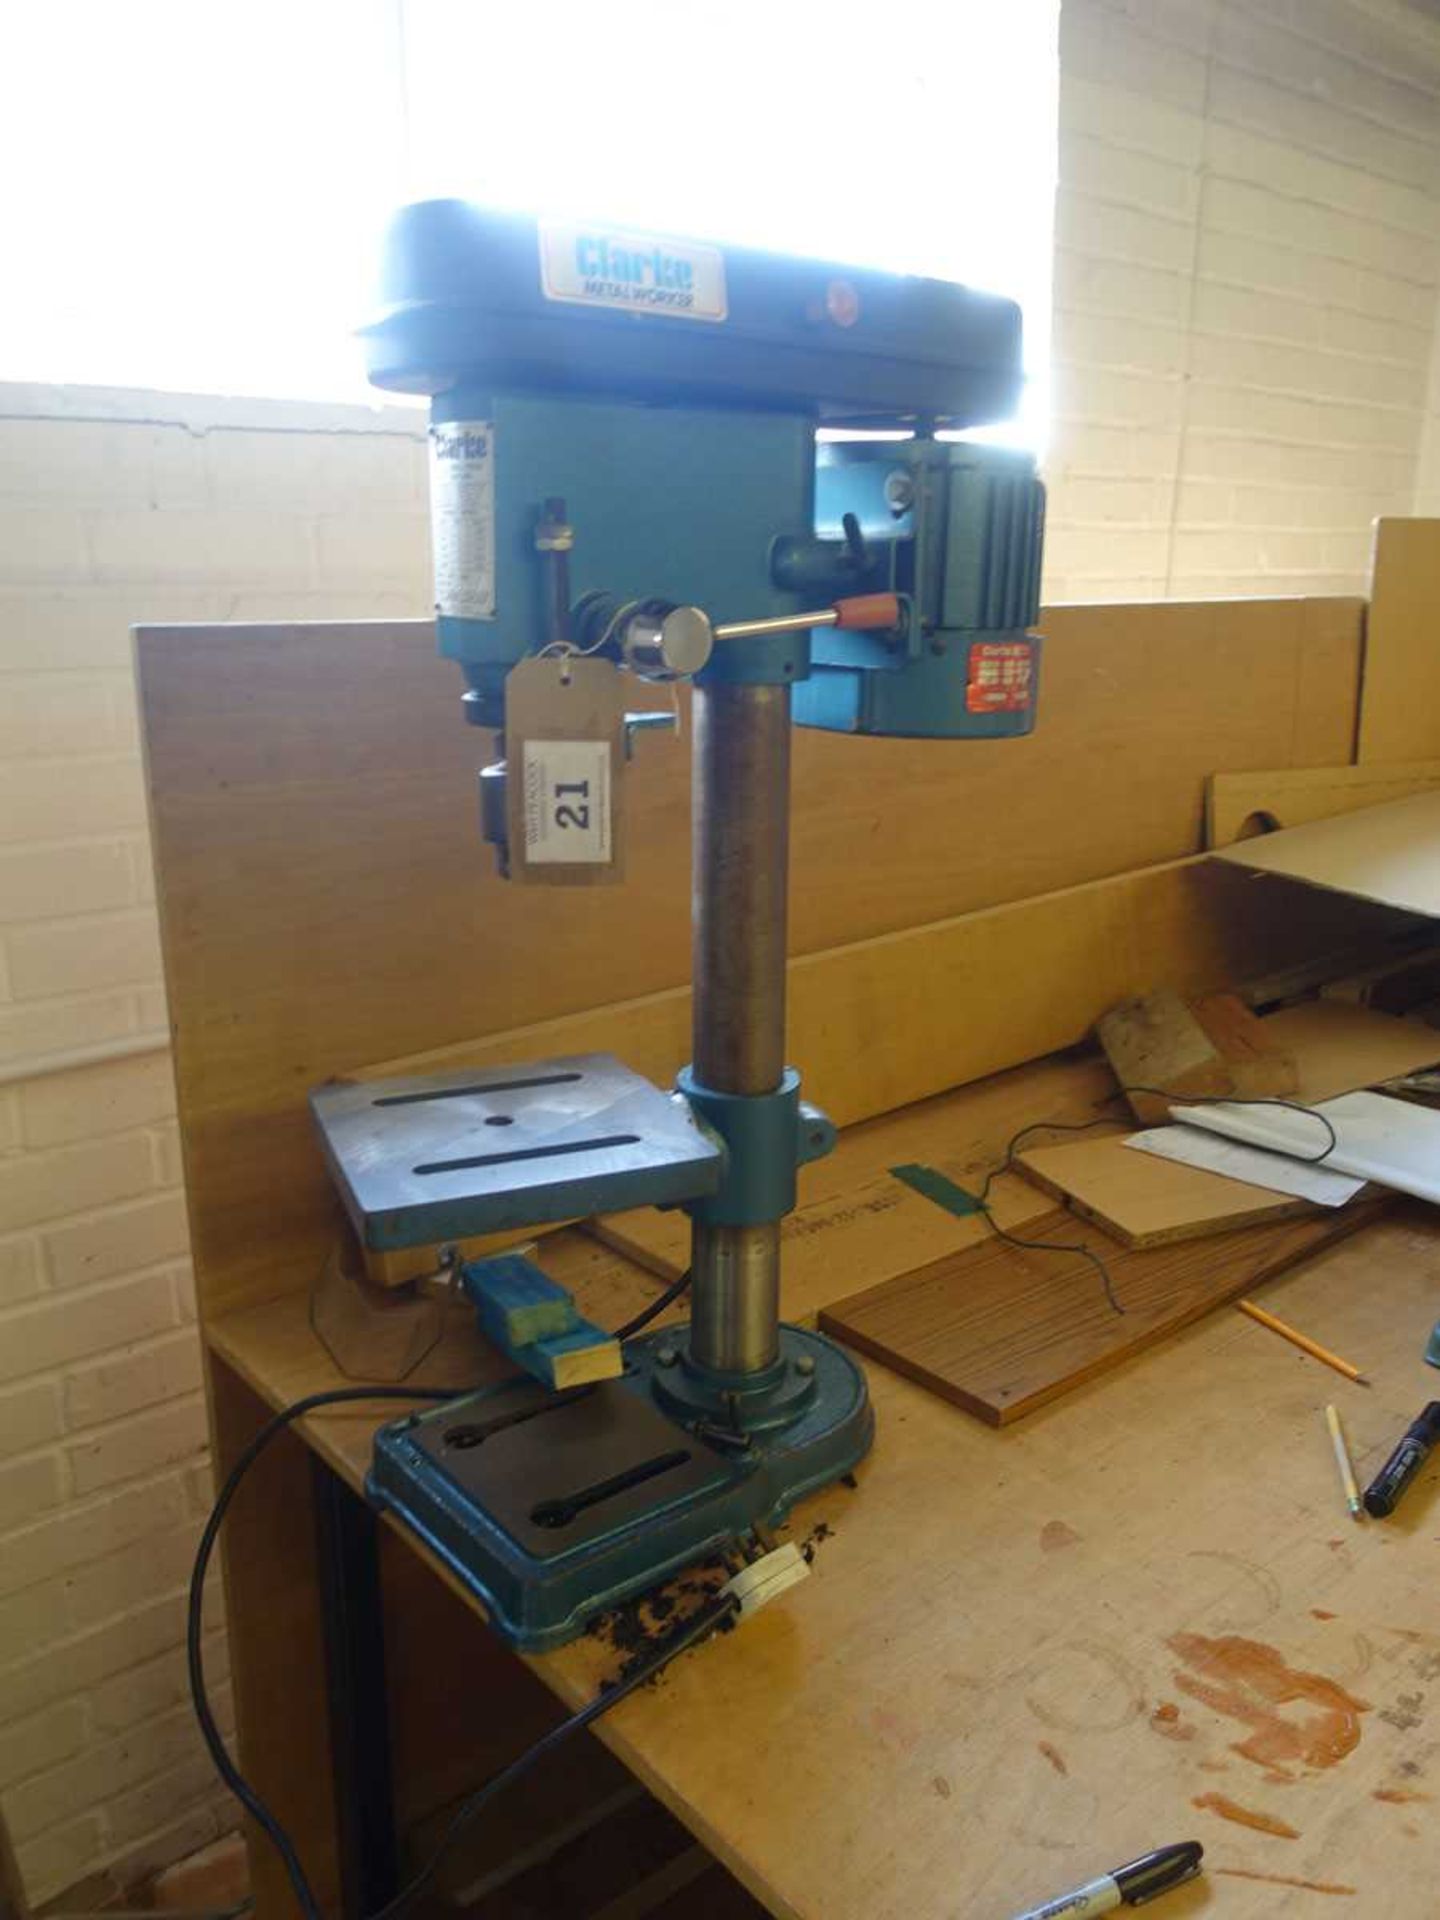 +VAT Clarke Metalworker 1/2" bench drill, model CDP5HP, year1998, single phase electric (On